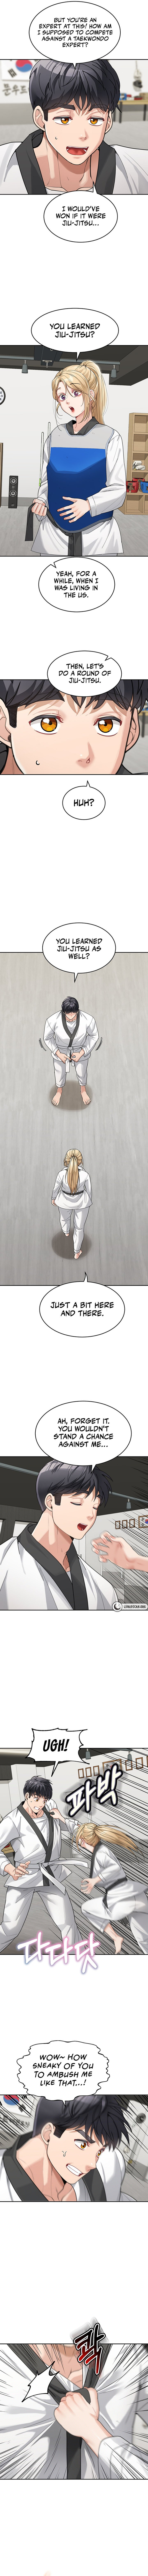 is-it-your-mother-or-sister-chap-30-7